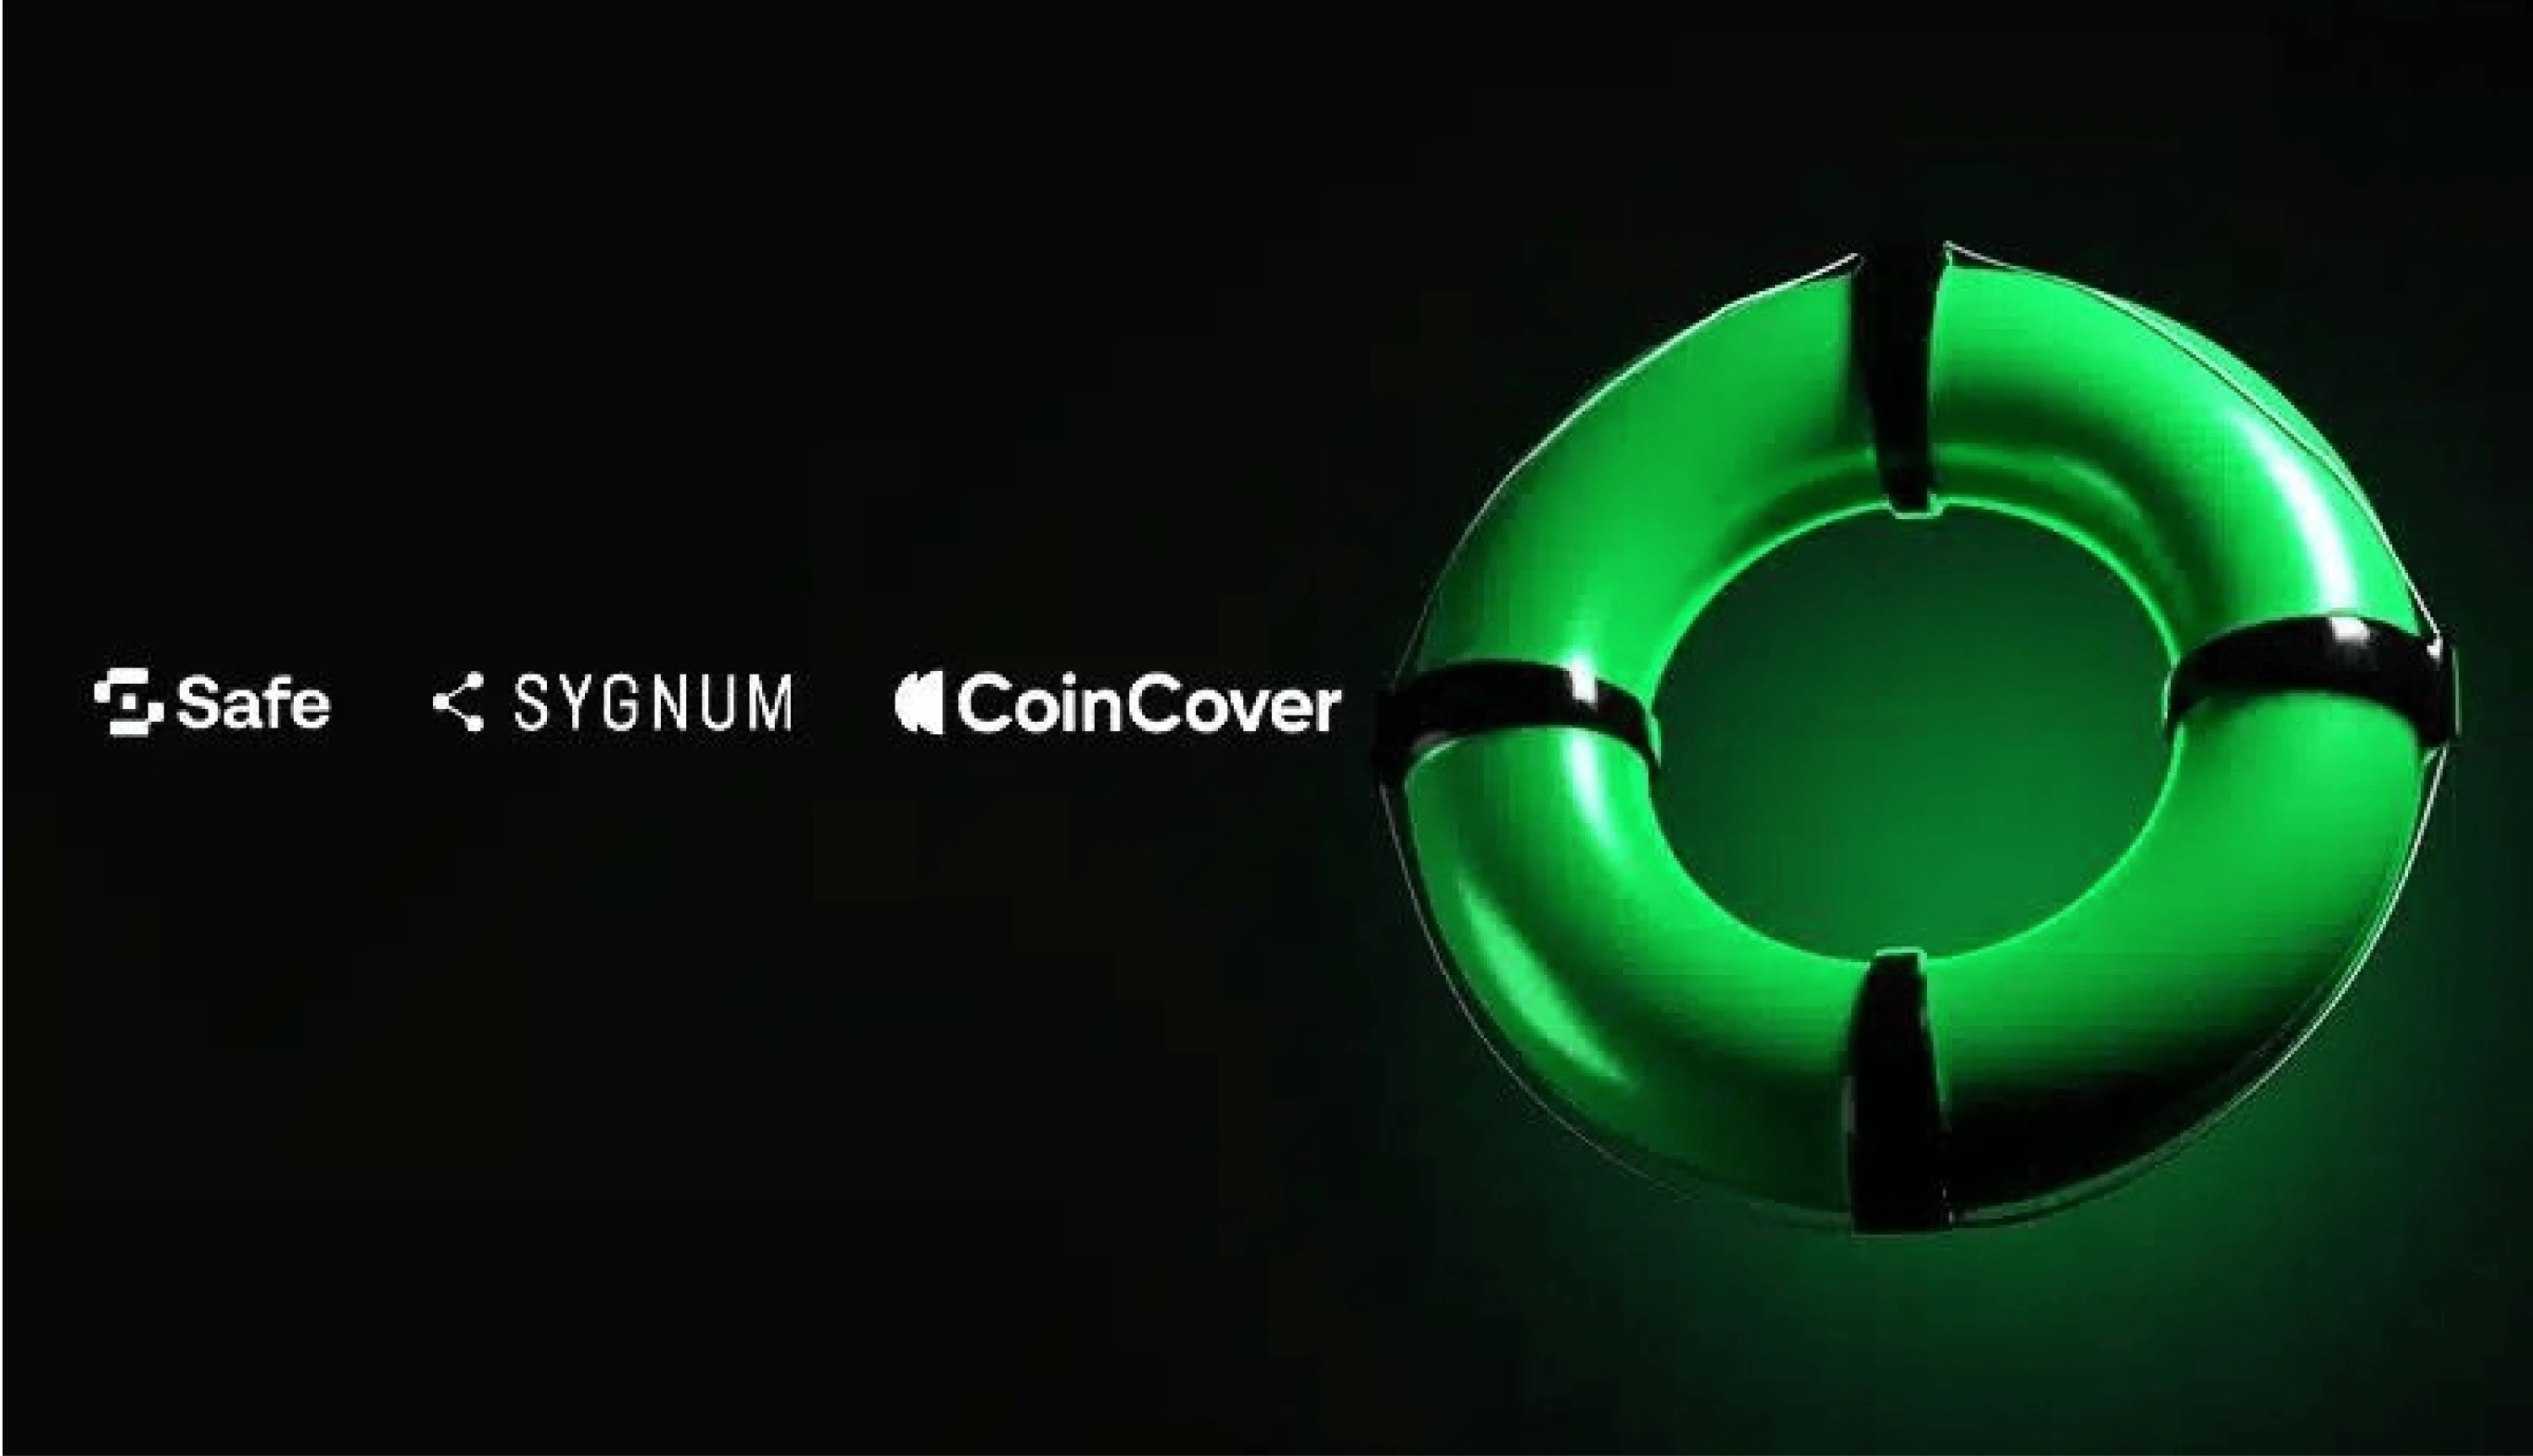  Safe Launches Recovery Hub with Sygnum, CoinCover